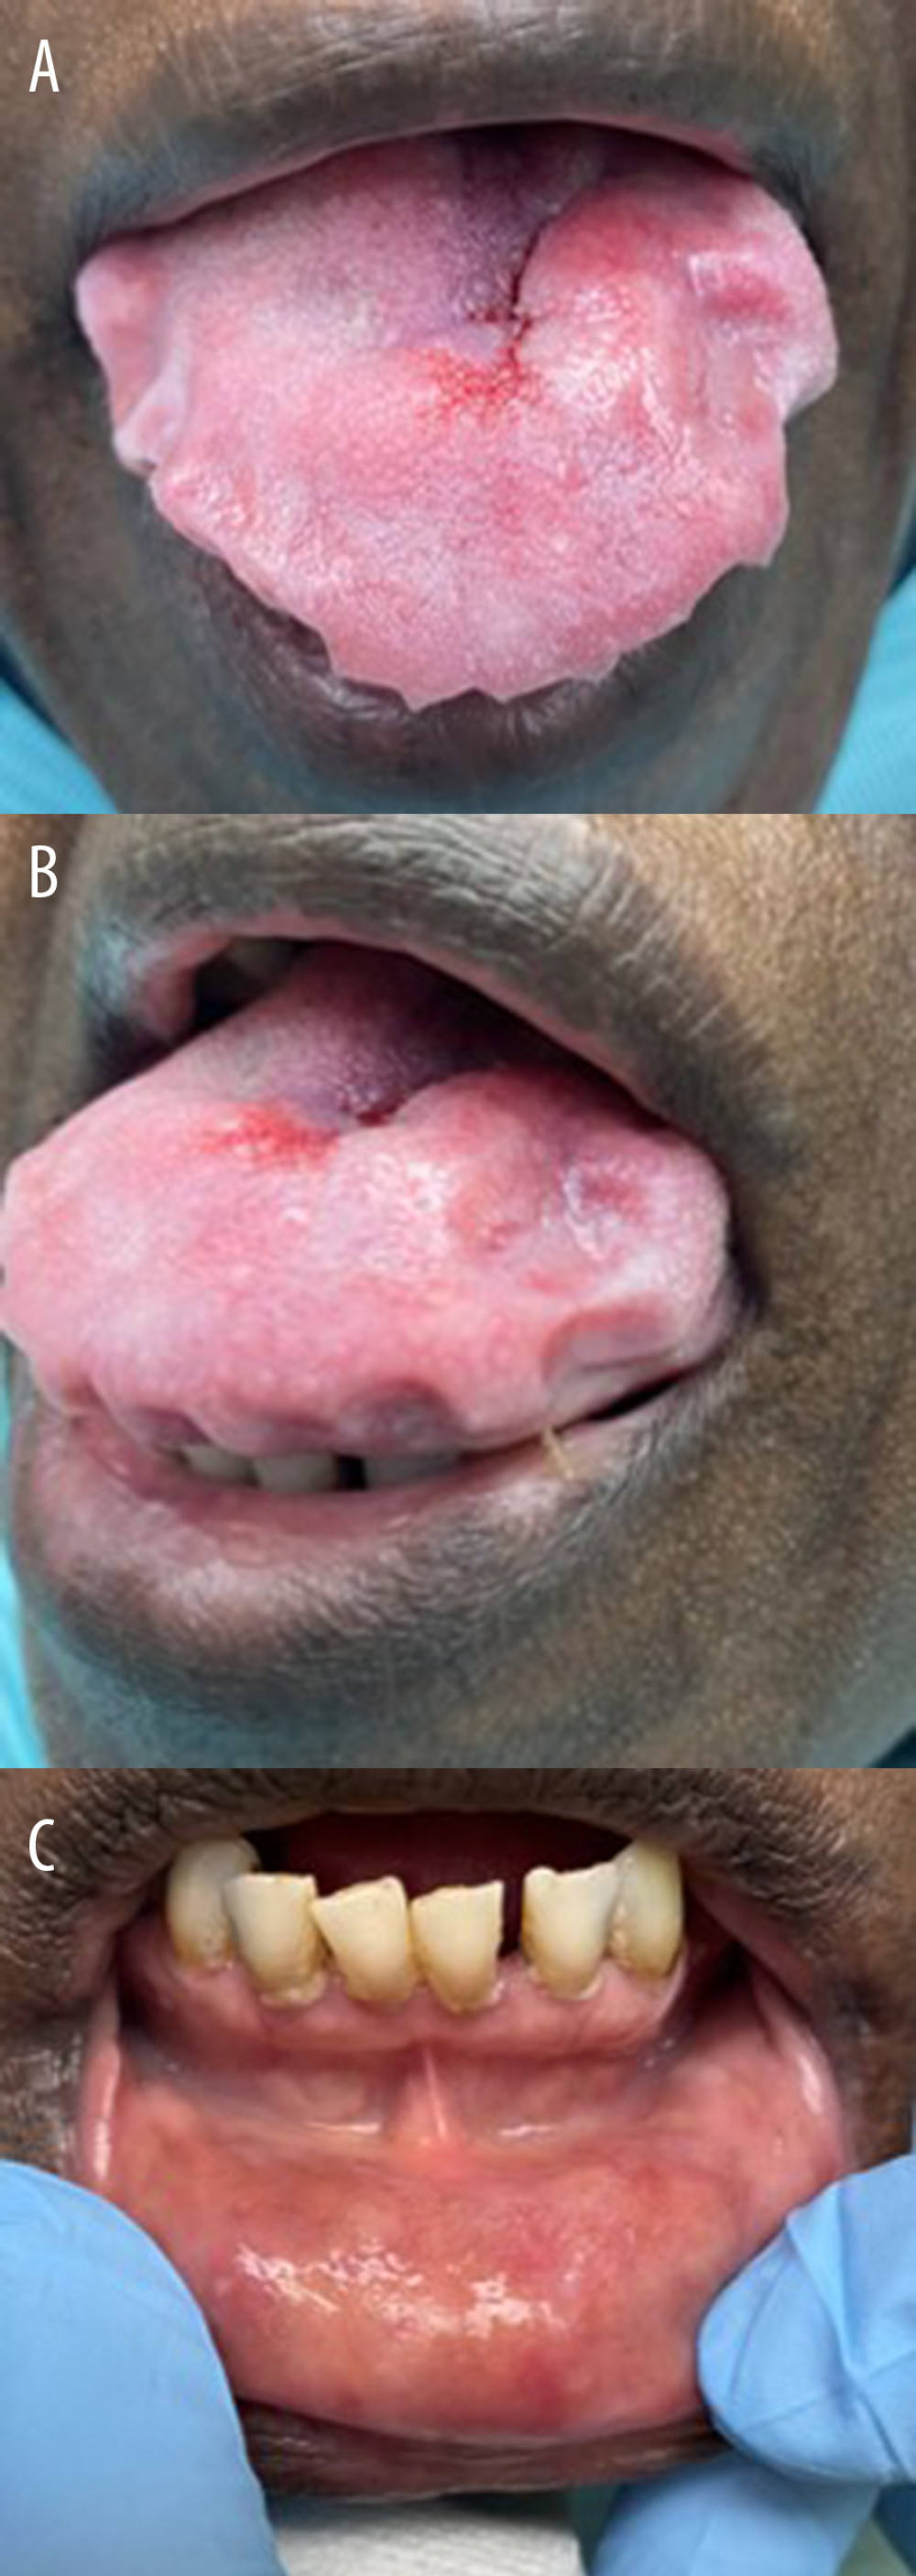 Clinical images of the tongue showing normal covering mucosa with macroglossia almost filling the oral cavity with dental indentation (A, B); and mandibular labial mucosa with normal covering epithelium and raised-thick surface due to amyloid deposition (C).